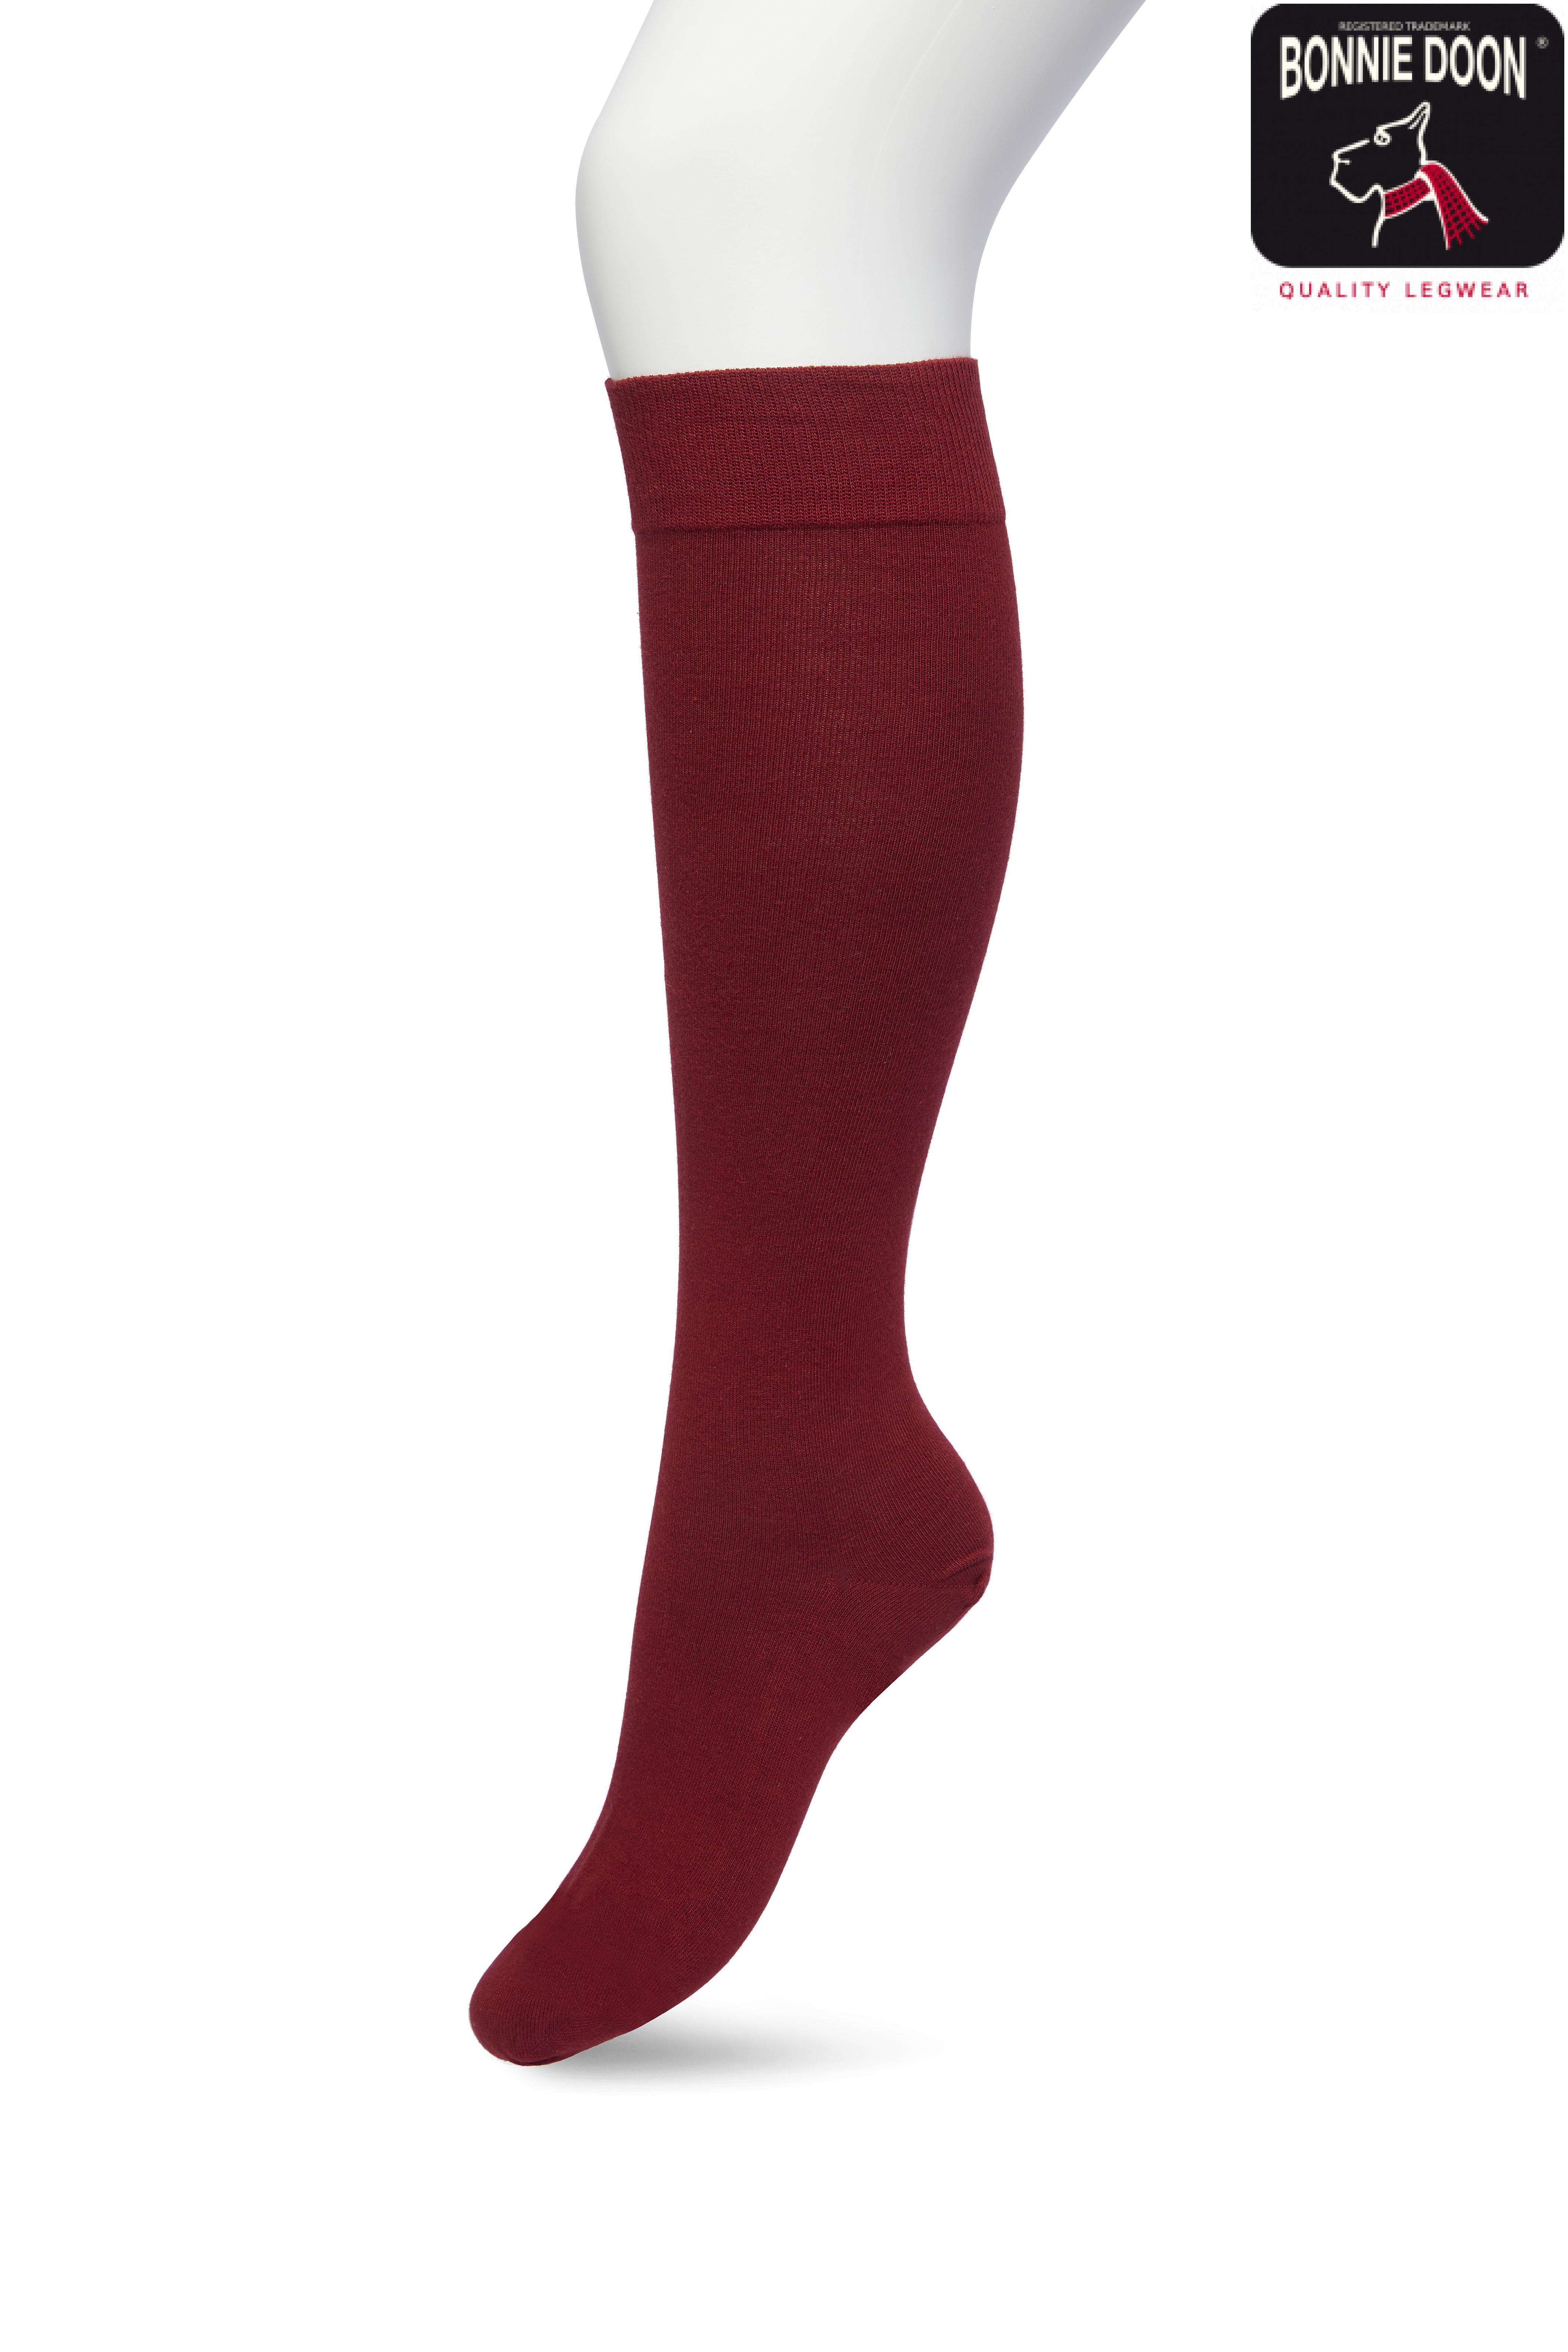 Cotton Knee-High Red